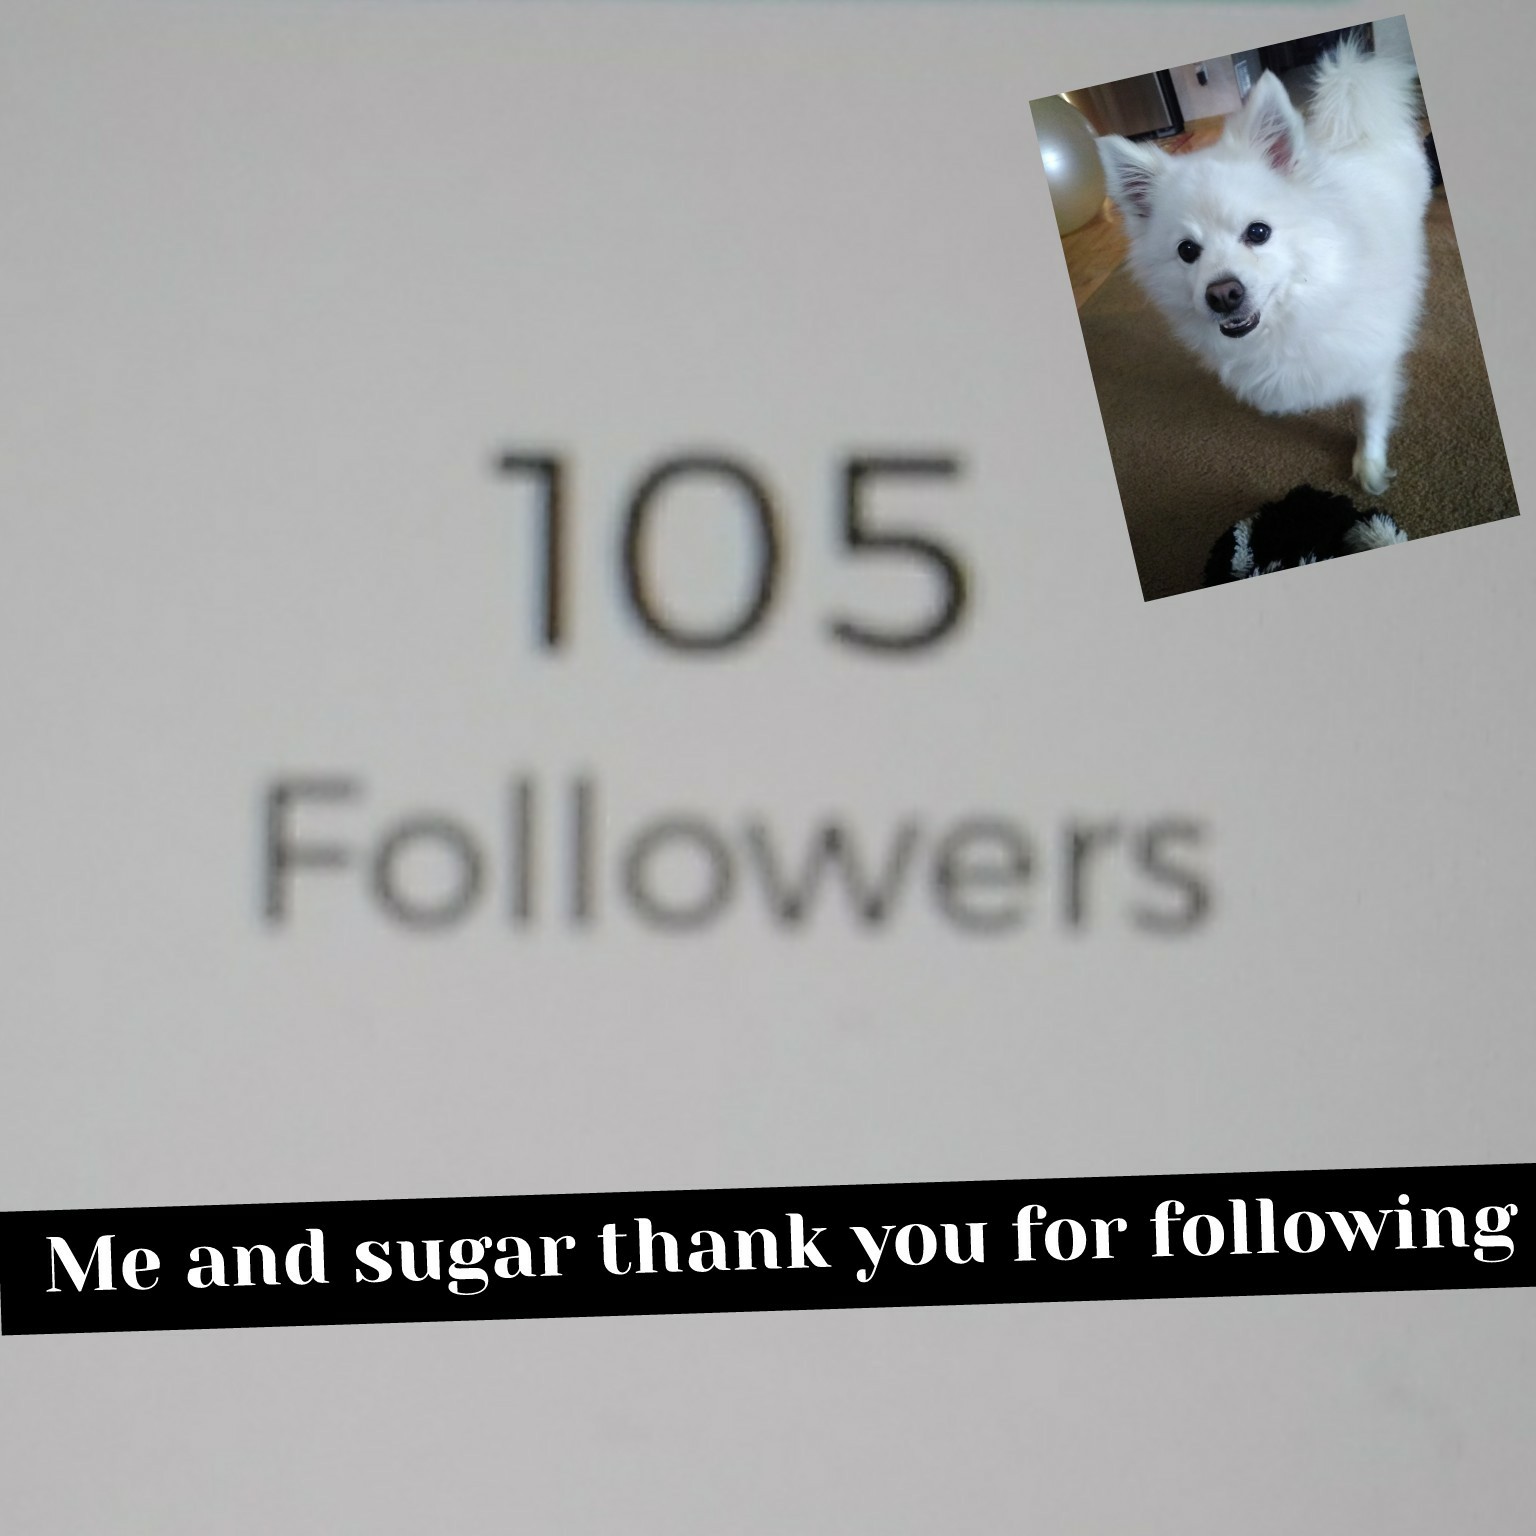 Me and sugar thank you for following